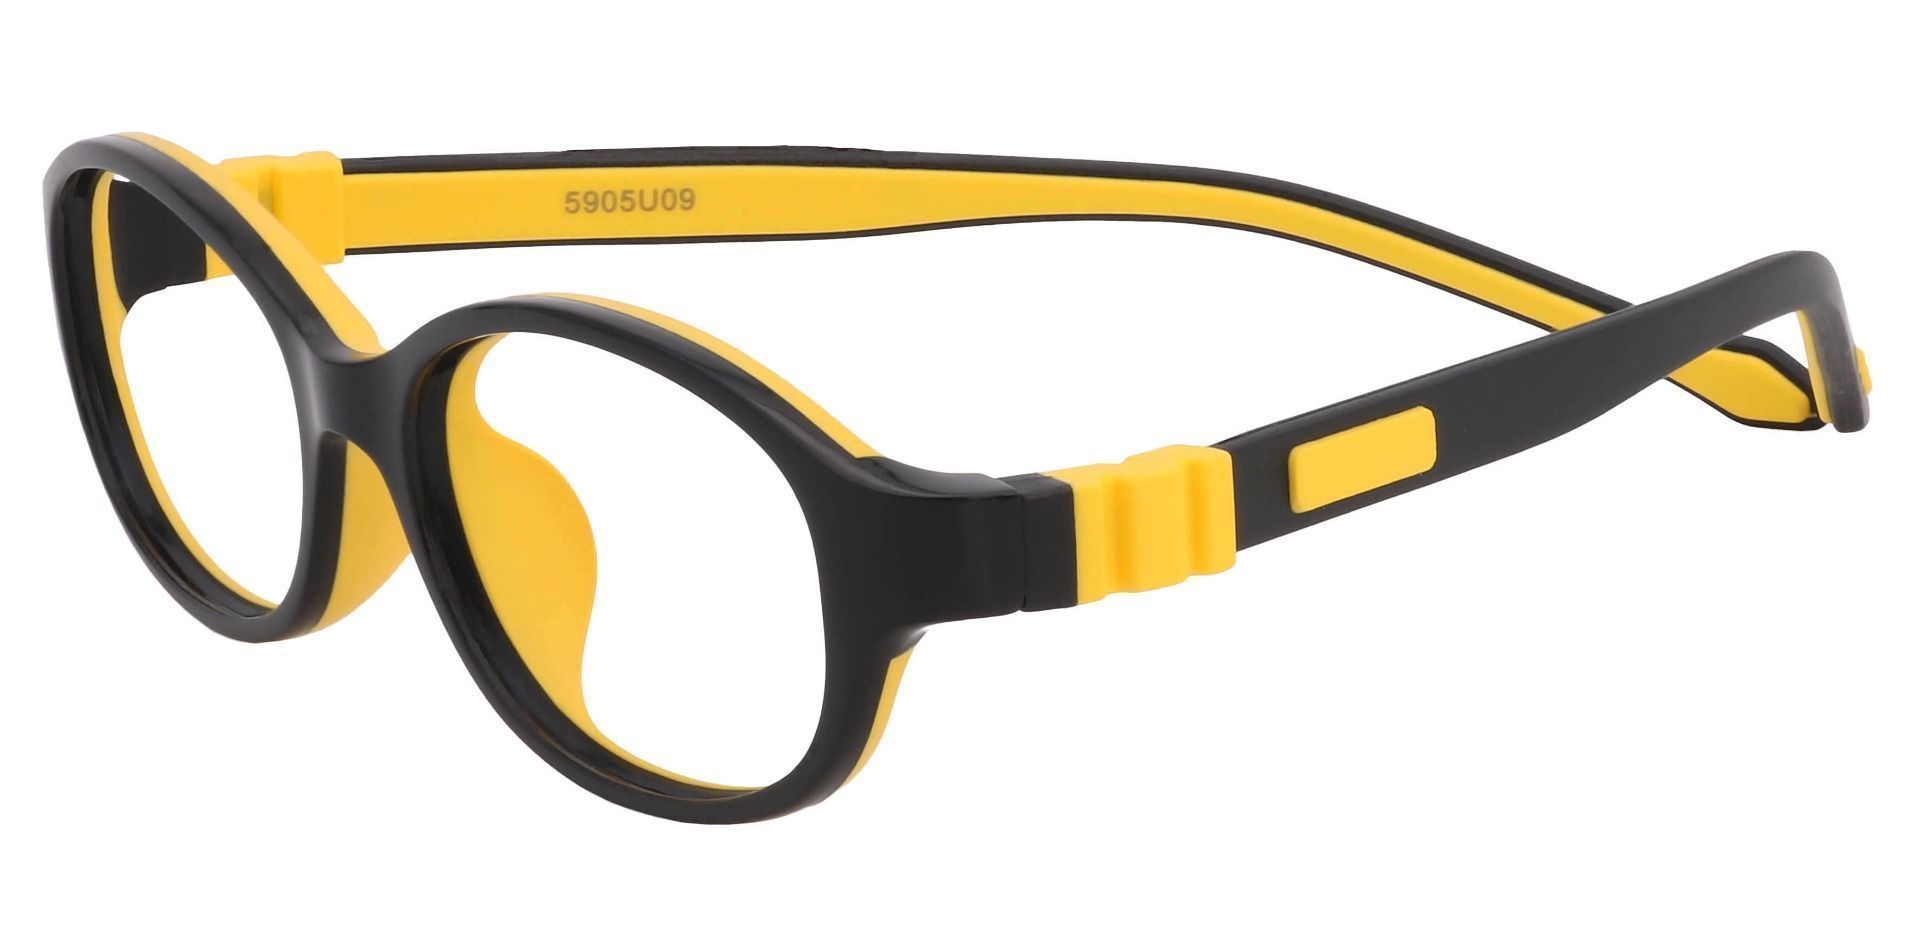 Stone Oval Blue Light Blocking Glasses - The Frame Is Black And Yellow